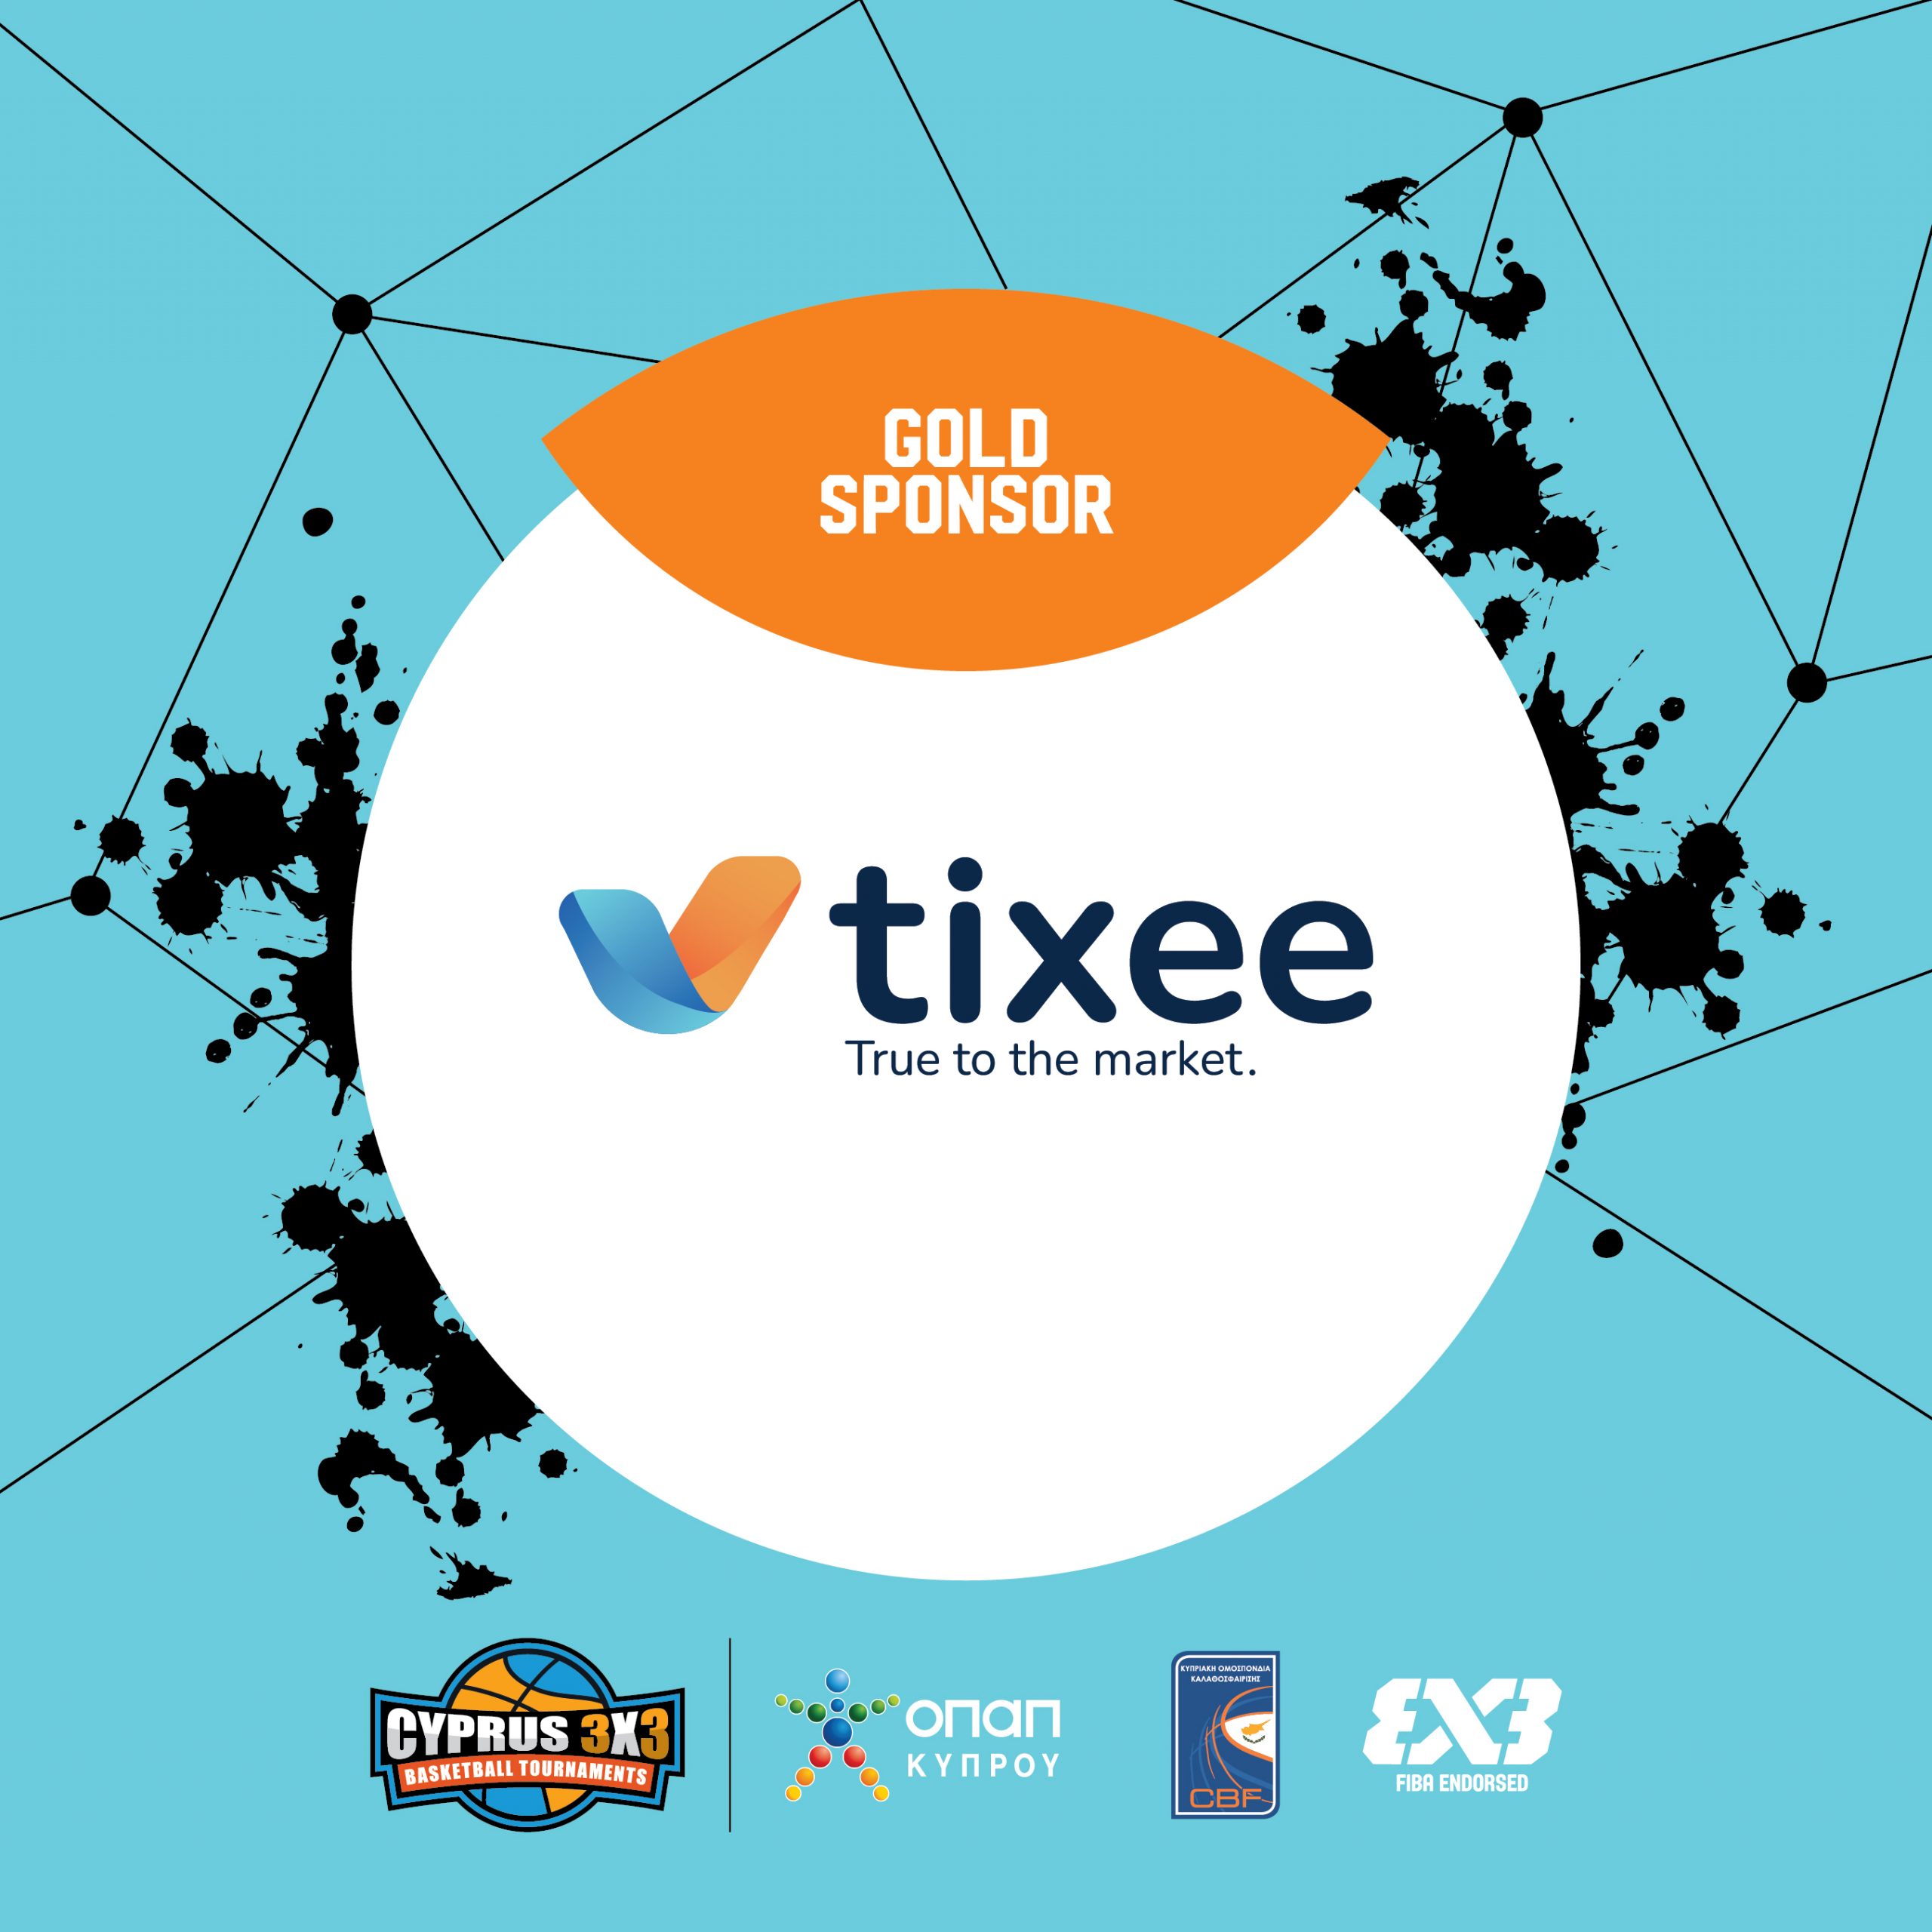 Tixee Supports Cyprus 3×3 as The New Gold Sponsor